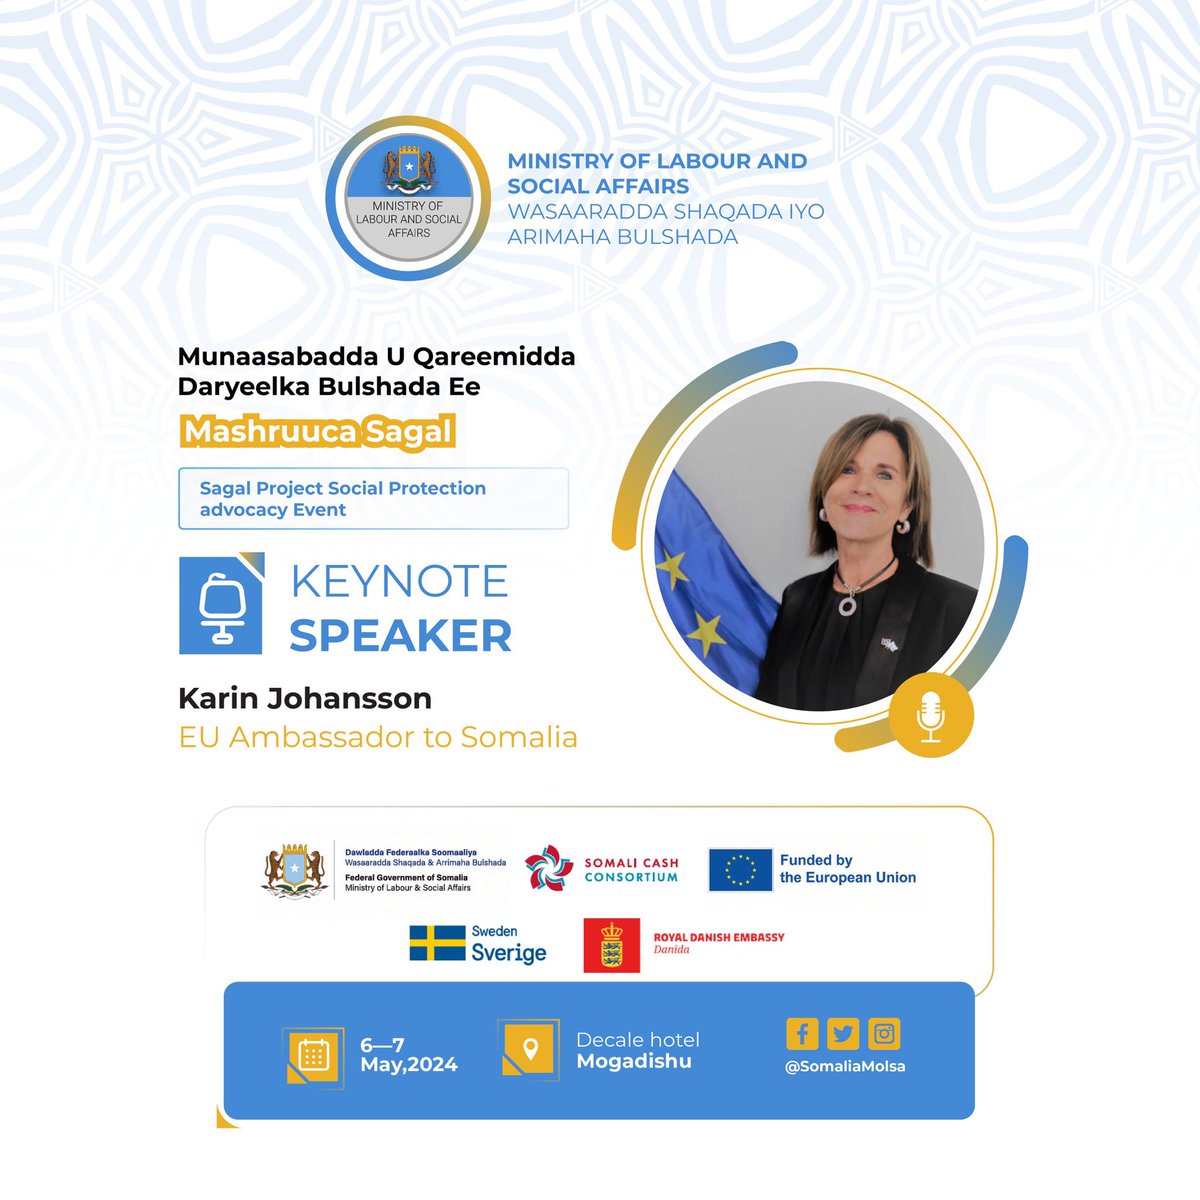 The @SomaliaMolsa is excited to announce that @EU_in_Somalia Amb. Karin Johansson will deliver keynote remarks at the Sagal Project Social Protection advocacy event, which will take place from May 6th to 7th in Mogadishu. #SocialProtection